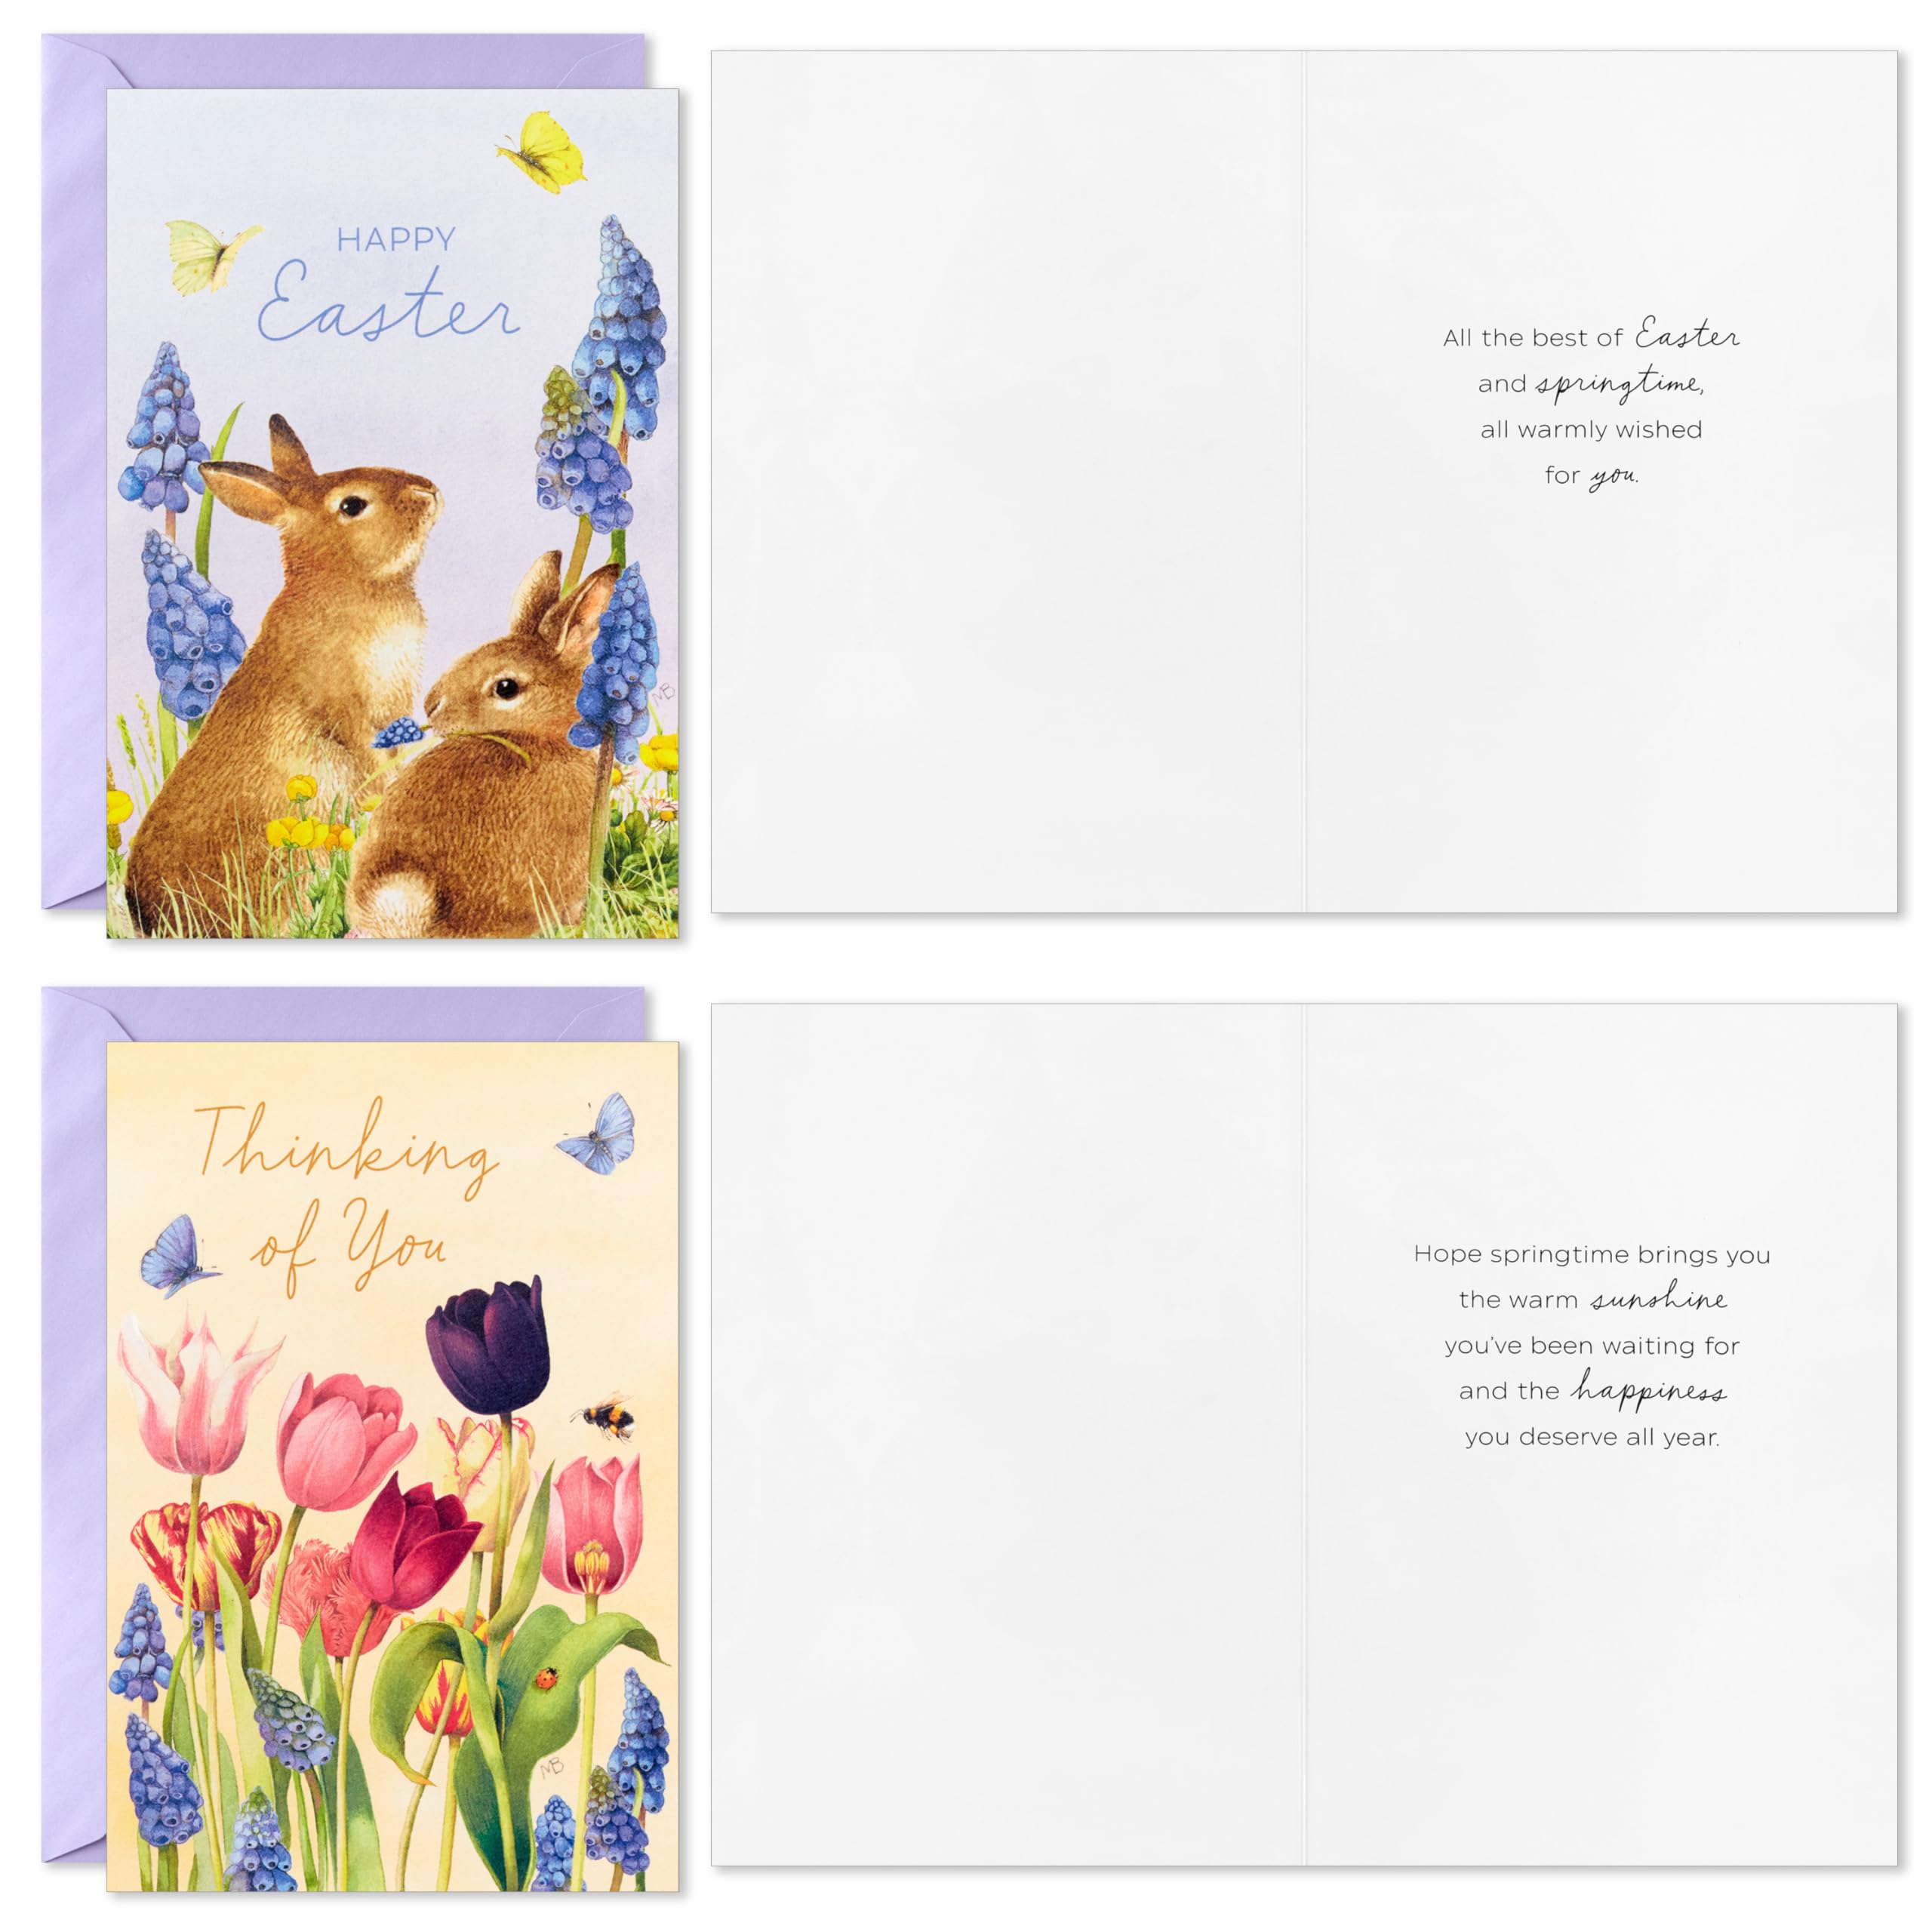 Hallmark Marjorlein Bastin Assorted Spring and Easter Cards (36 Cards with Envelopes)